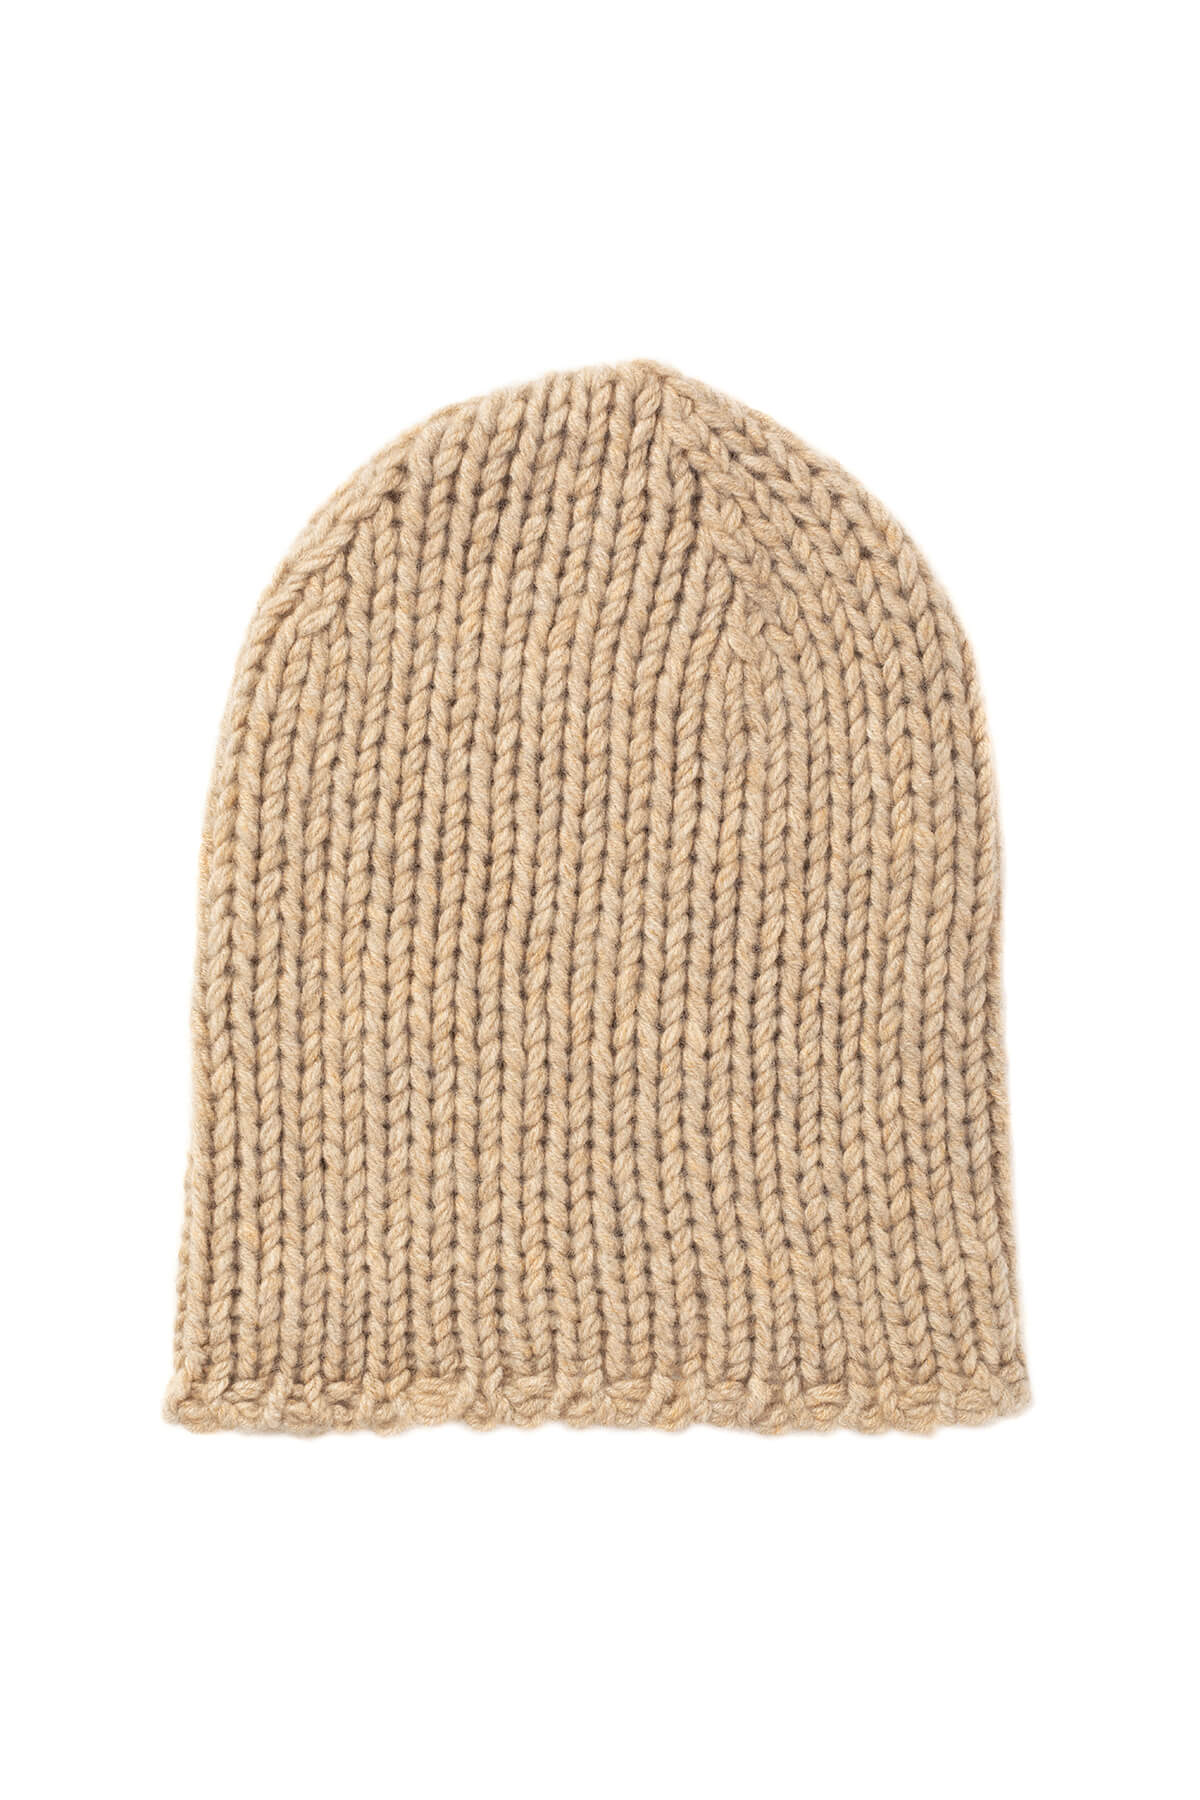 Johnstons of Elgin’s Oatmeal Chunky Jersey Cashmere Hat on a white background HAB03196HB0210